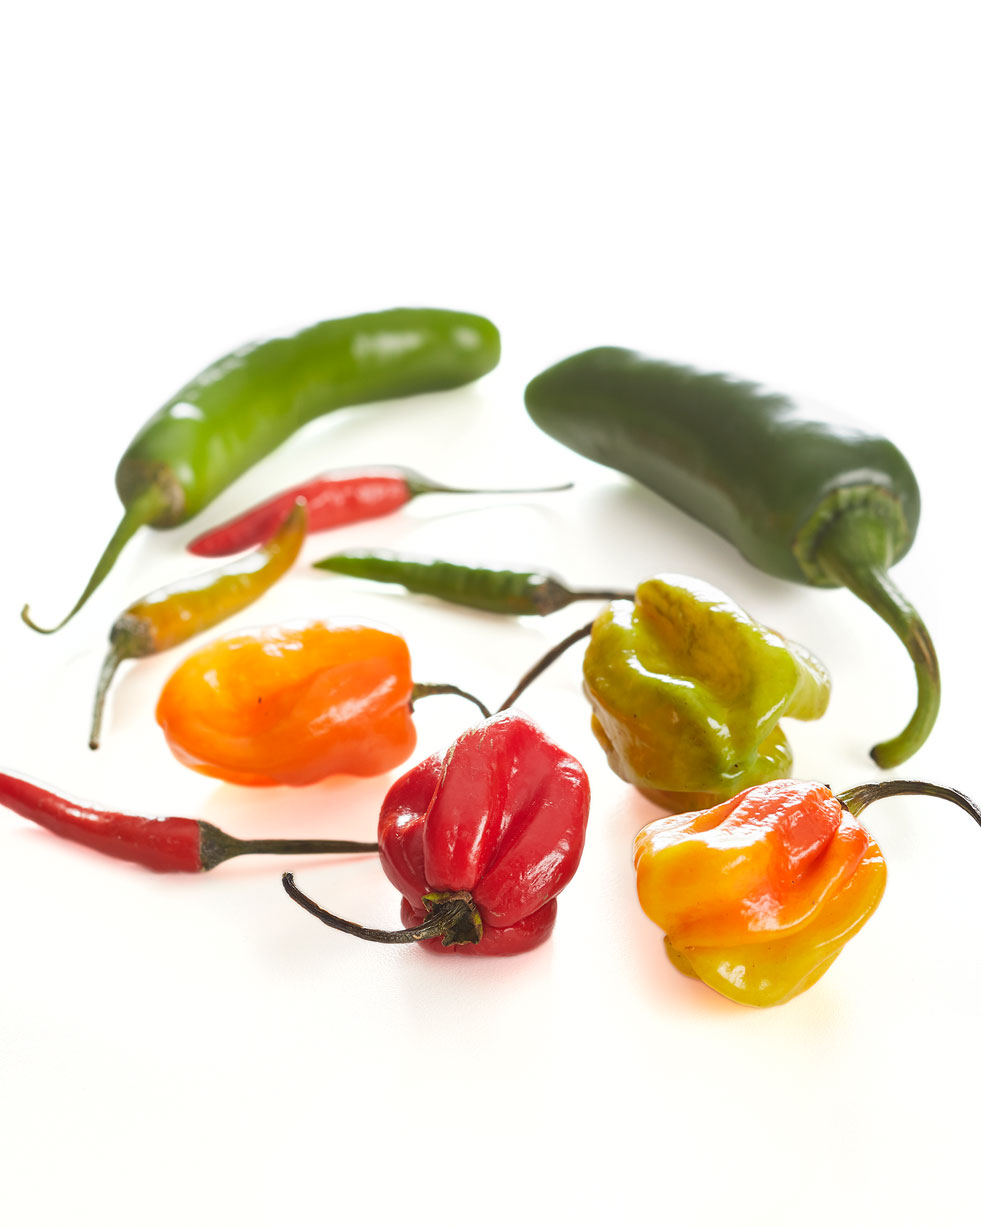 Which is hottest: jalapeño, serrano, Thai, or habanero peppers? 